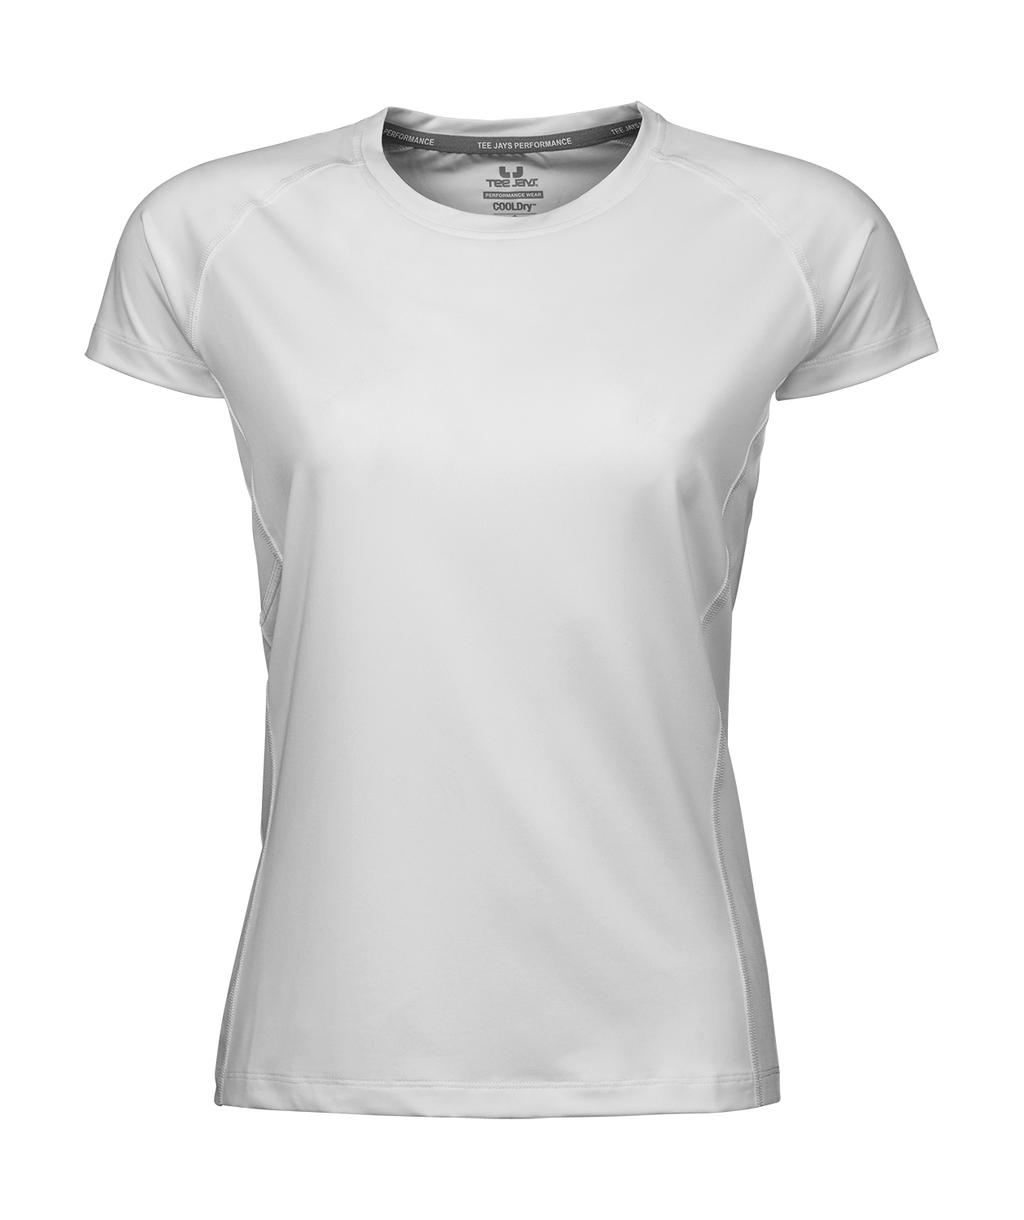  COOLdry Ladies Tee in Farbe White